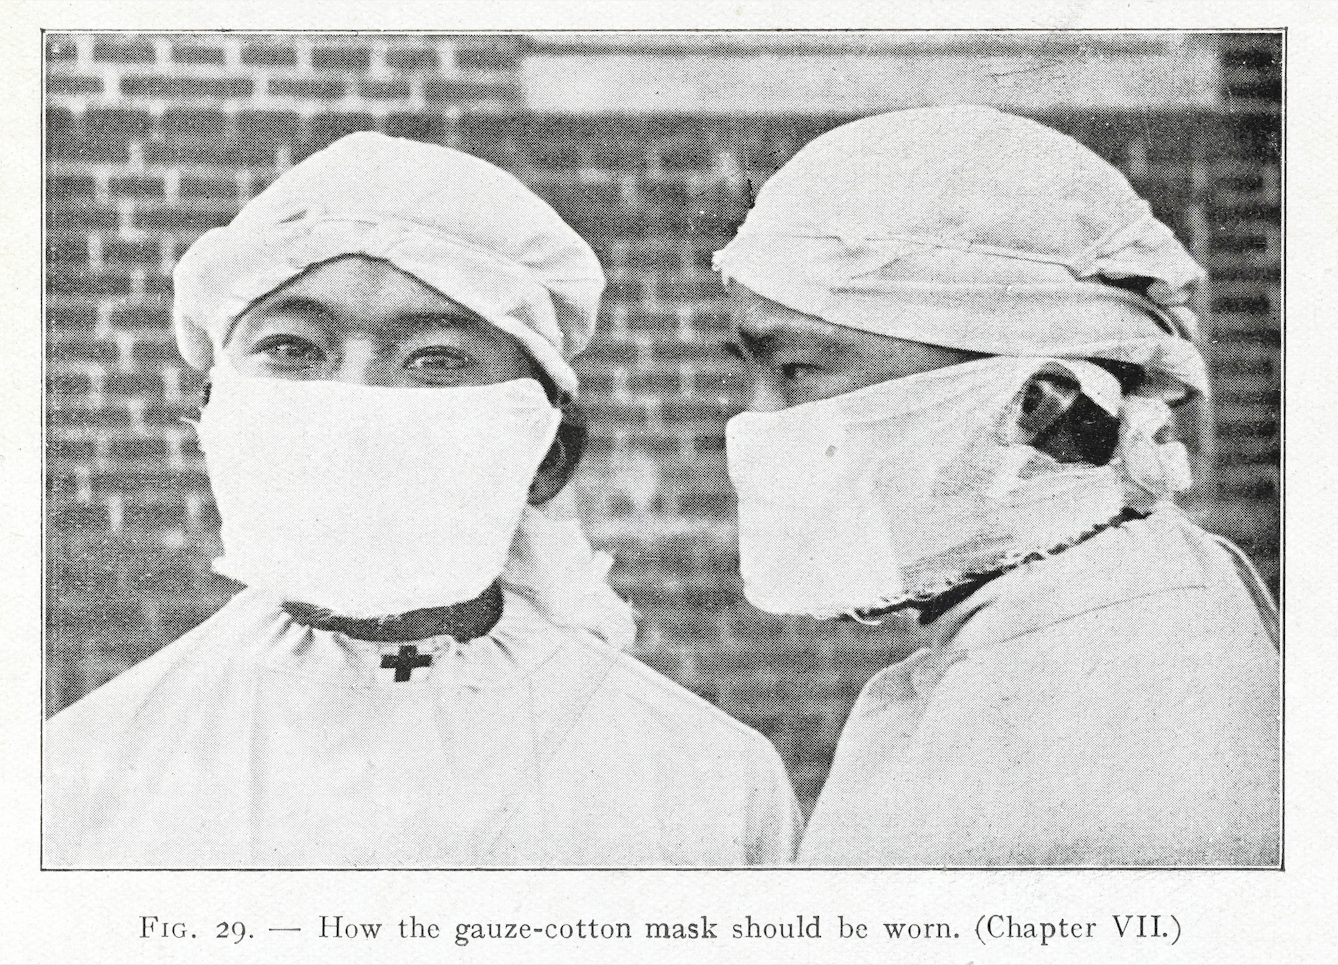 Photograph depicting how the gauze-cotton mask should be worn